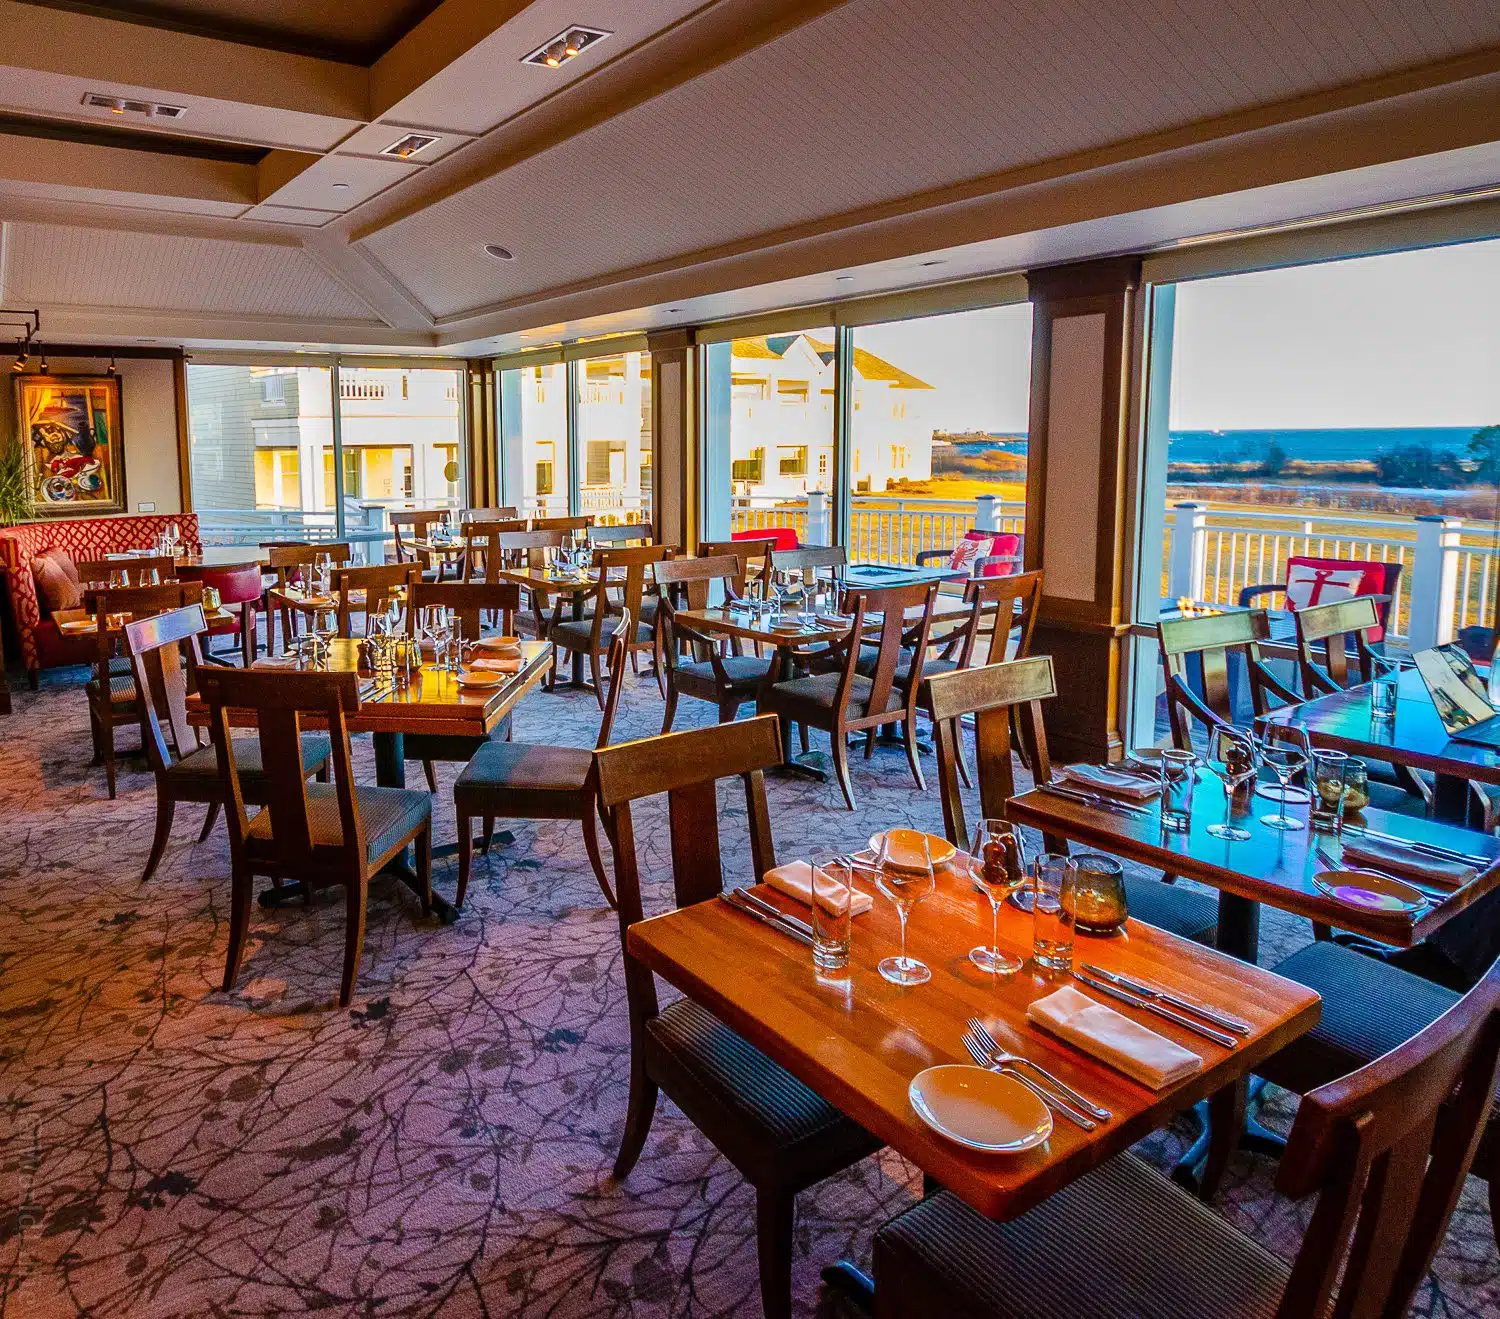 Inn by the Sea Maine Resort: Sea Glass Restaurant with an ocean view